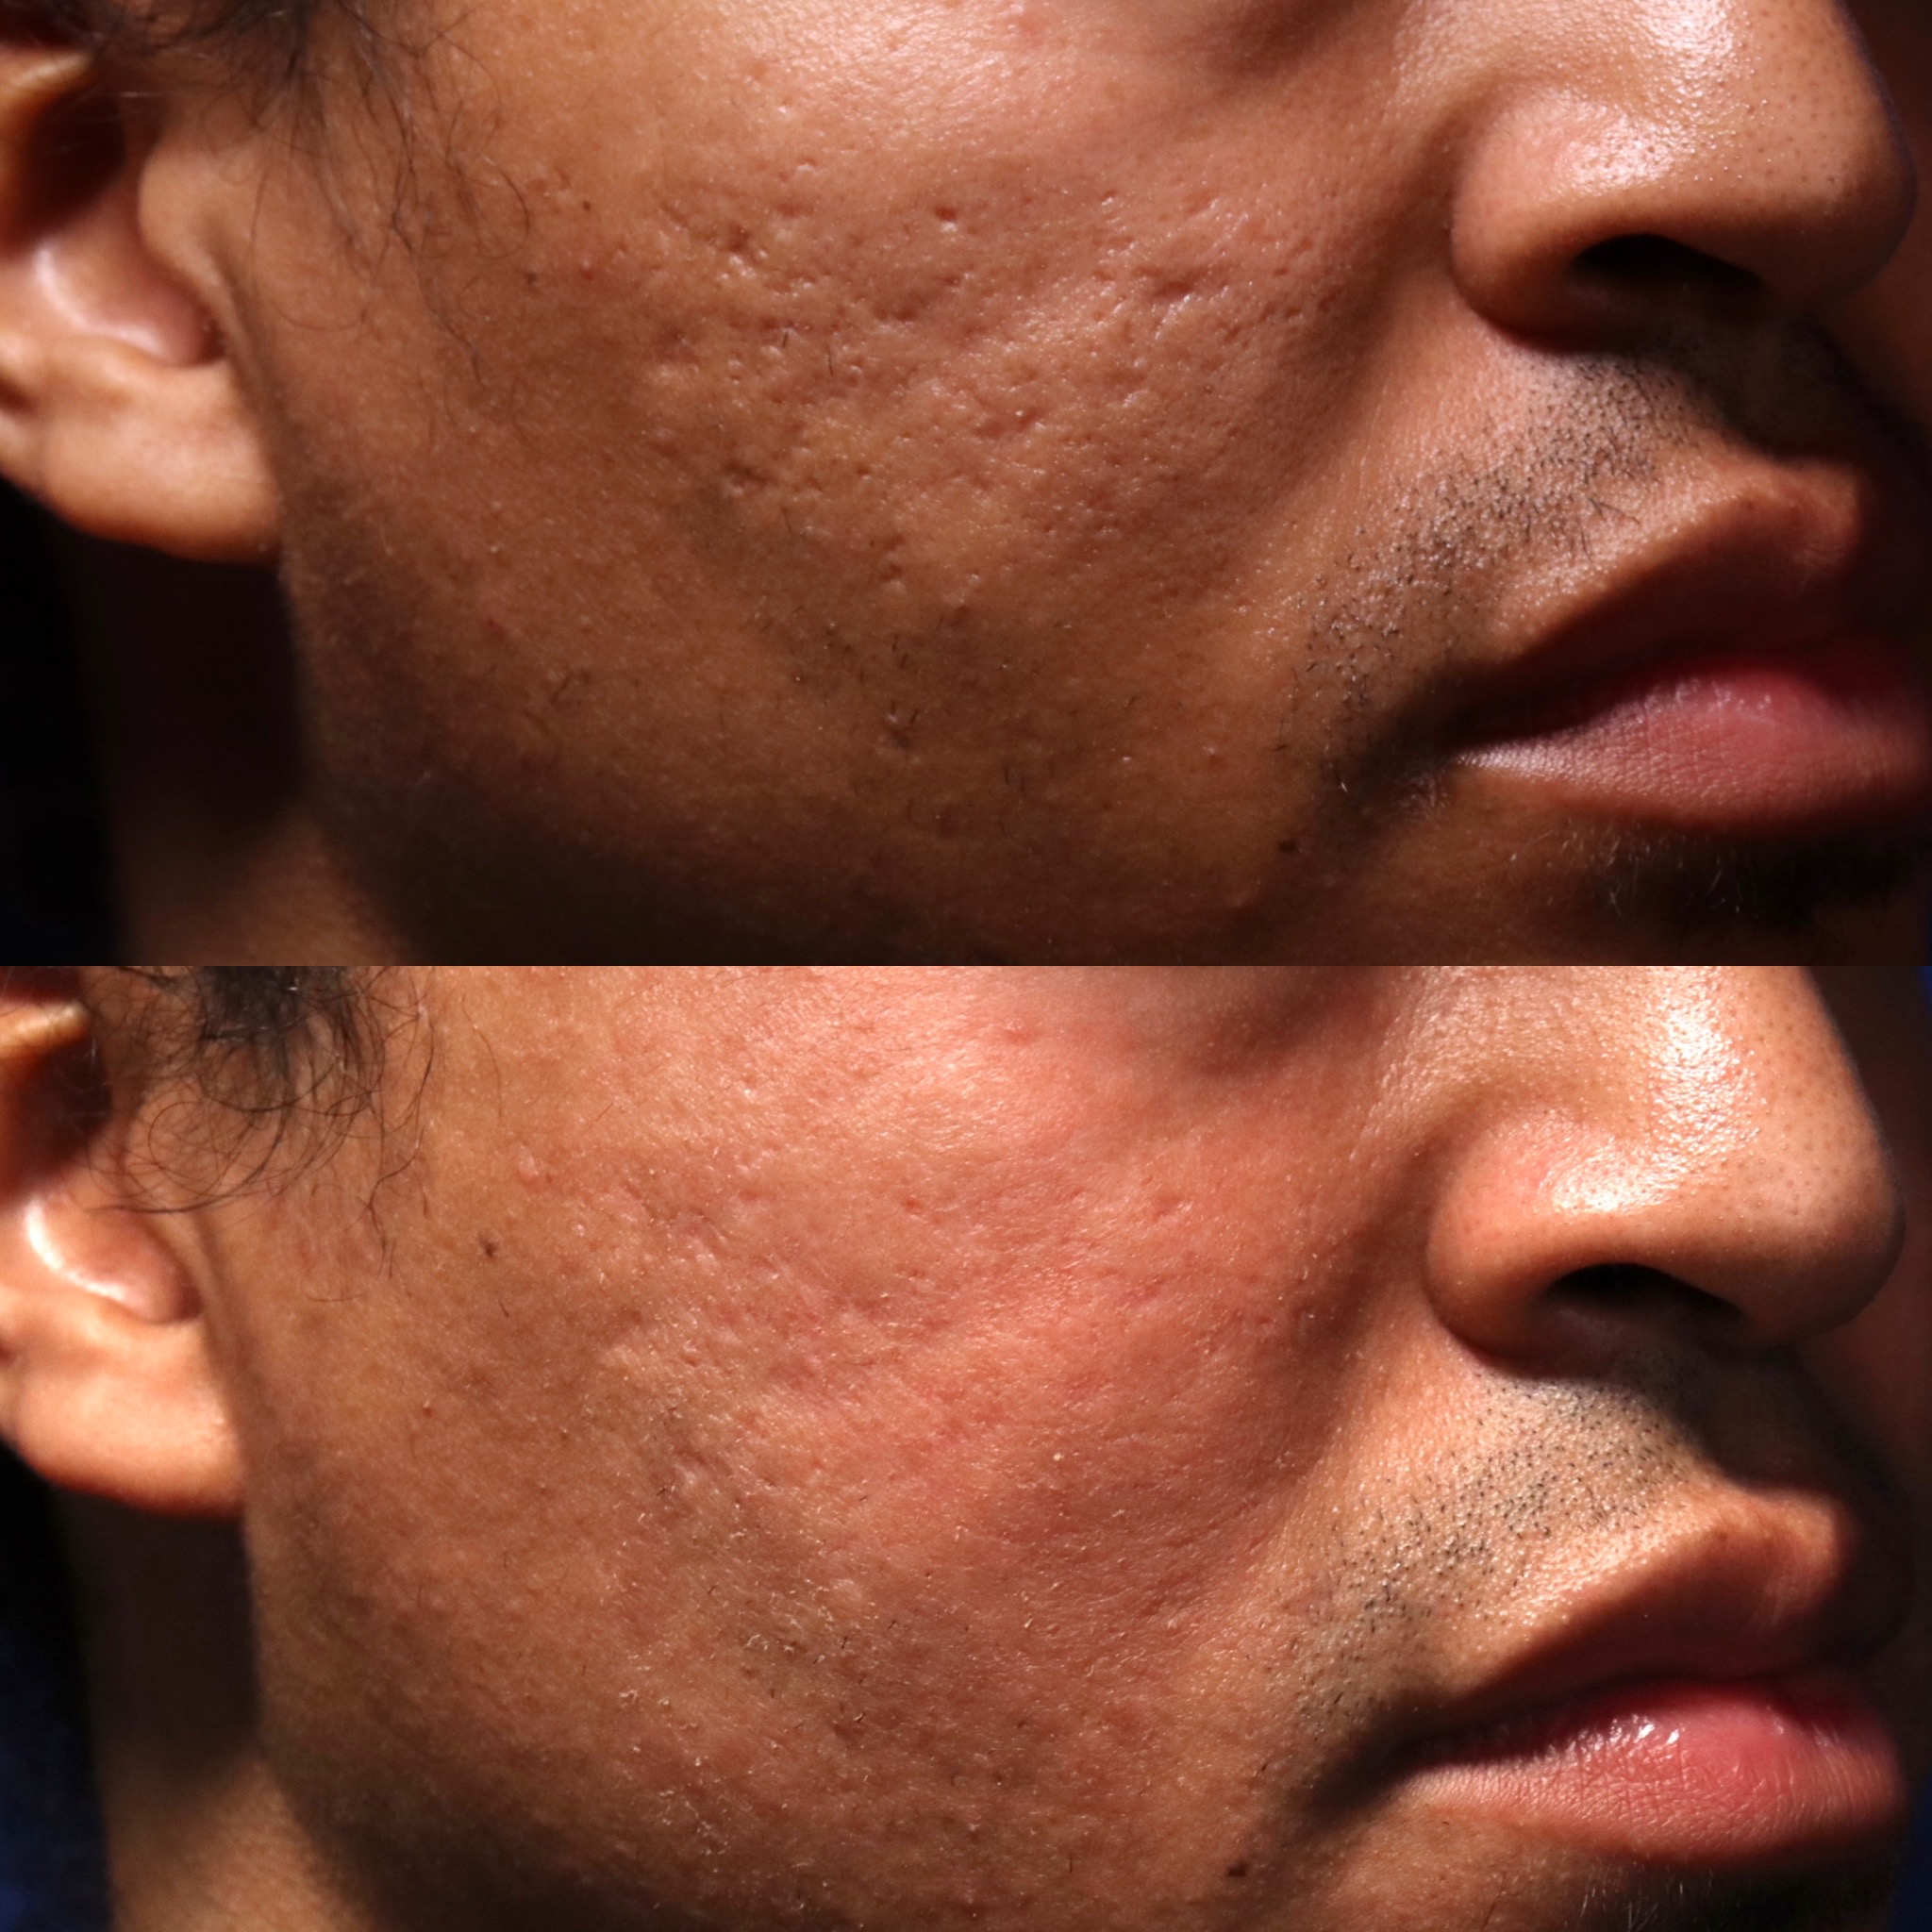 AP SHI 88 - Acne Scarring Active Acne Patient Results Scar Healing